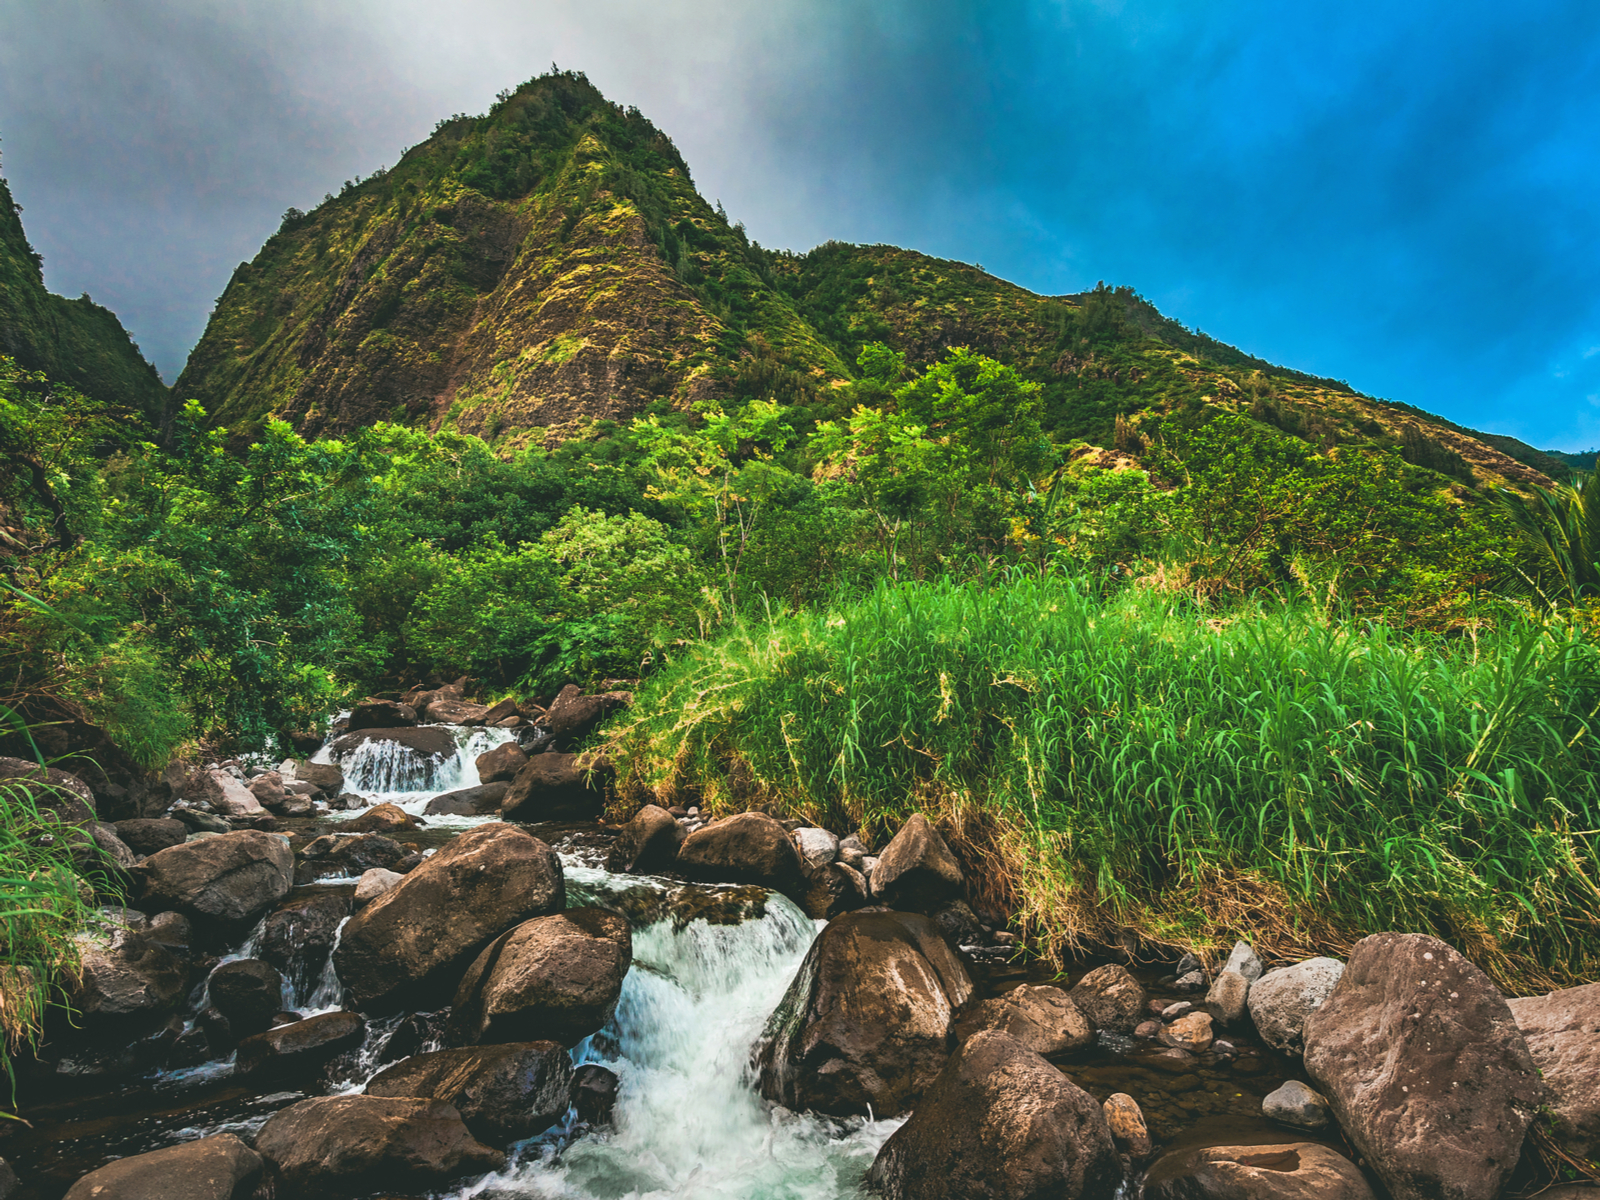 ‘Iao Valley State Park, one of the best hikes in Hawaii